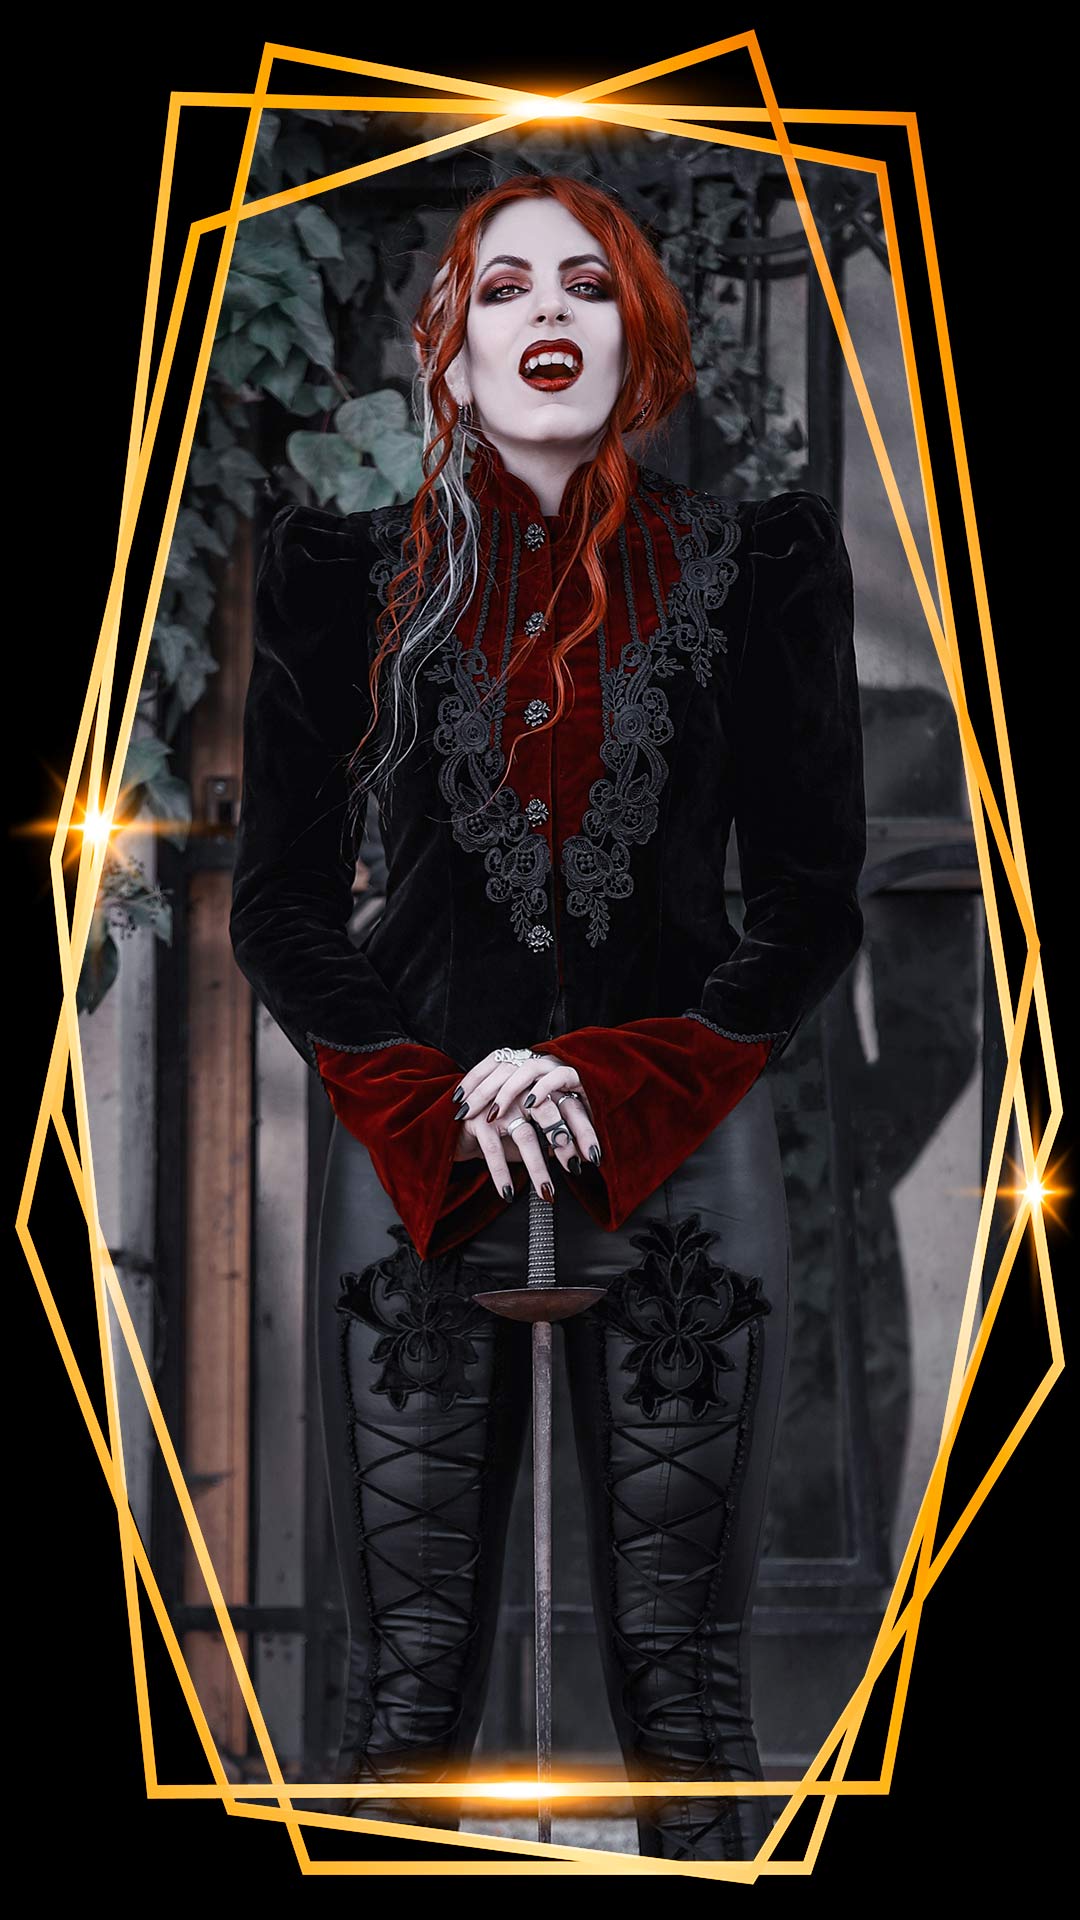 Fantasmagoria’s vampire customer dressed in a Royal Victorian Gothic style